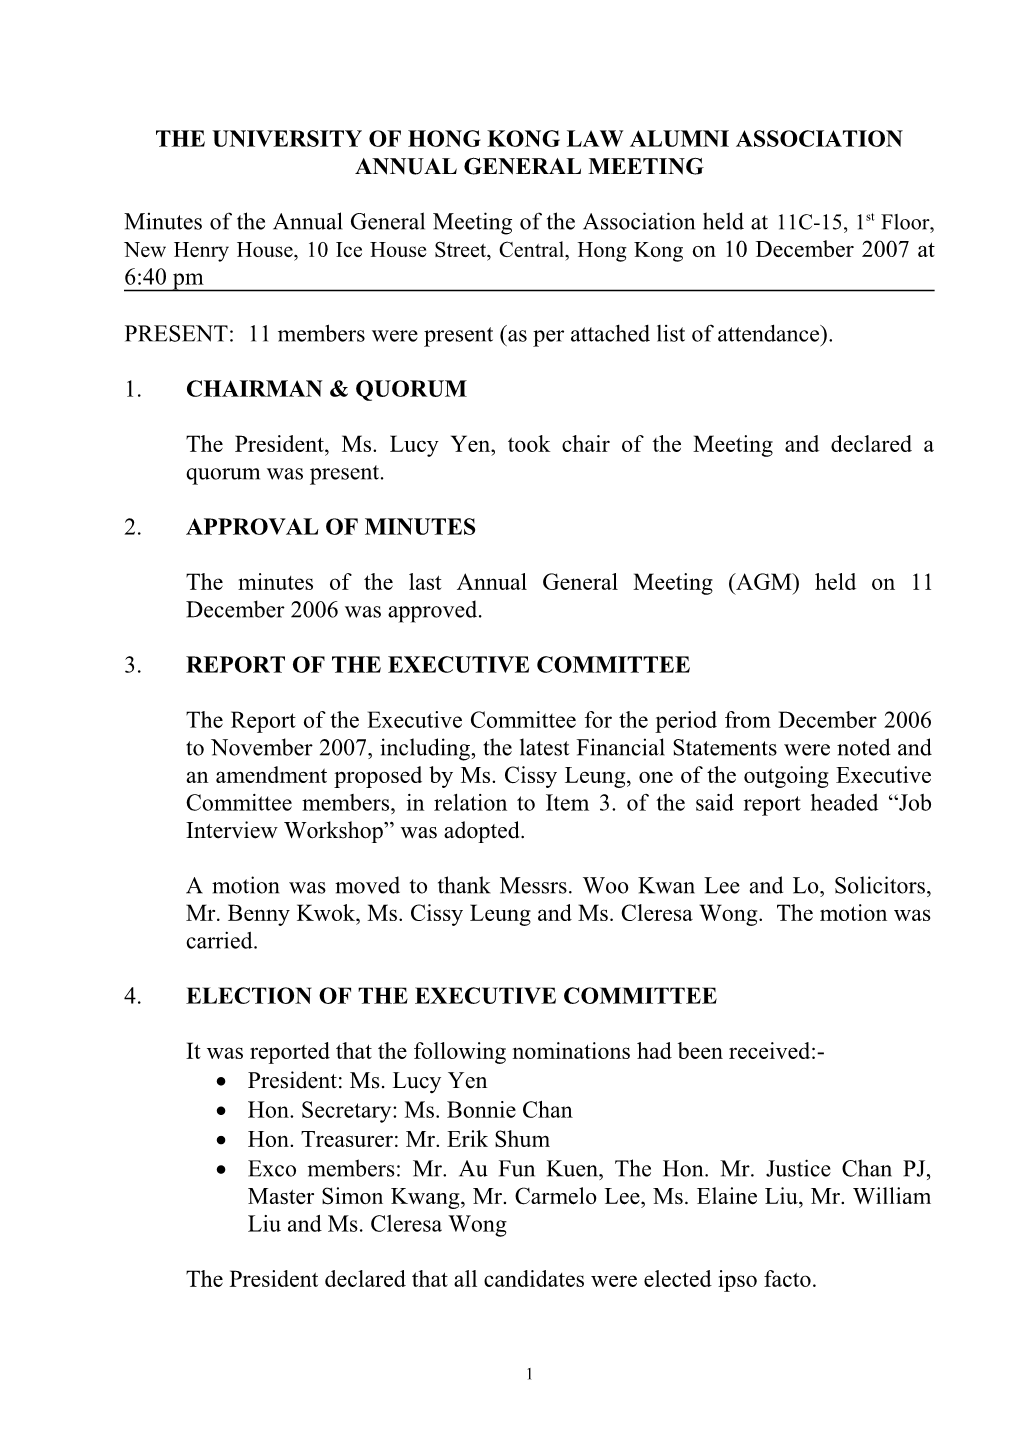 Minutes of the 1St Meeting of the Executive Committee of the Association Held at 1/F, Yip